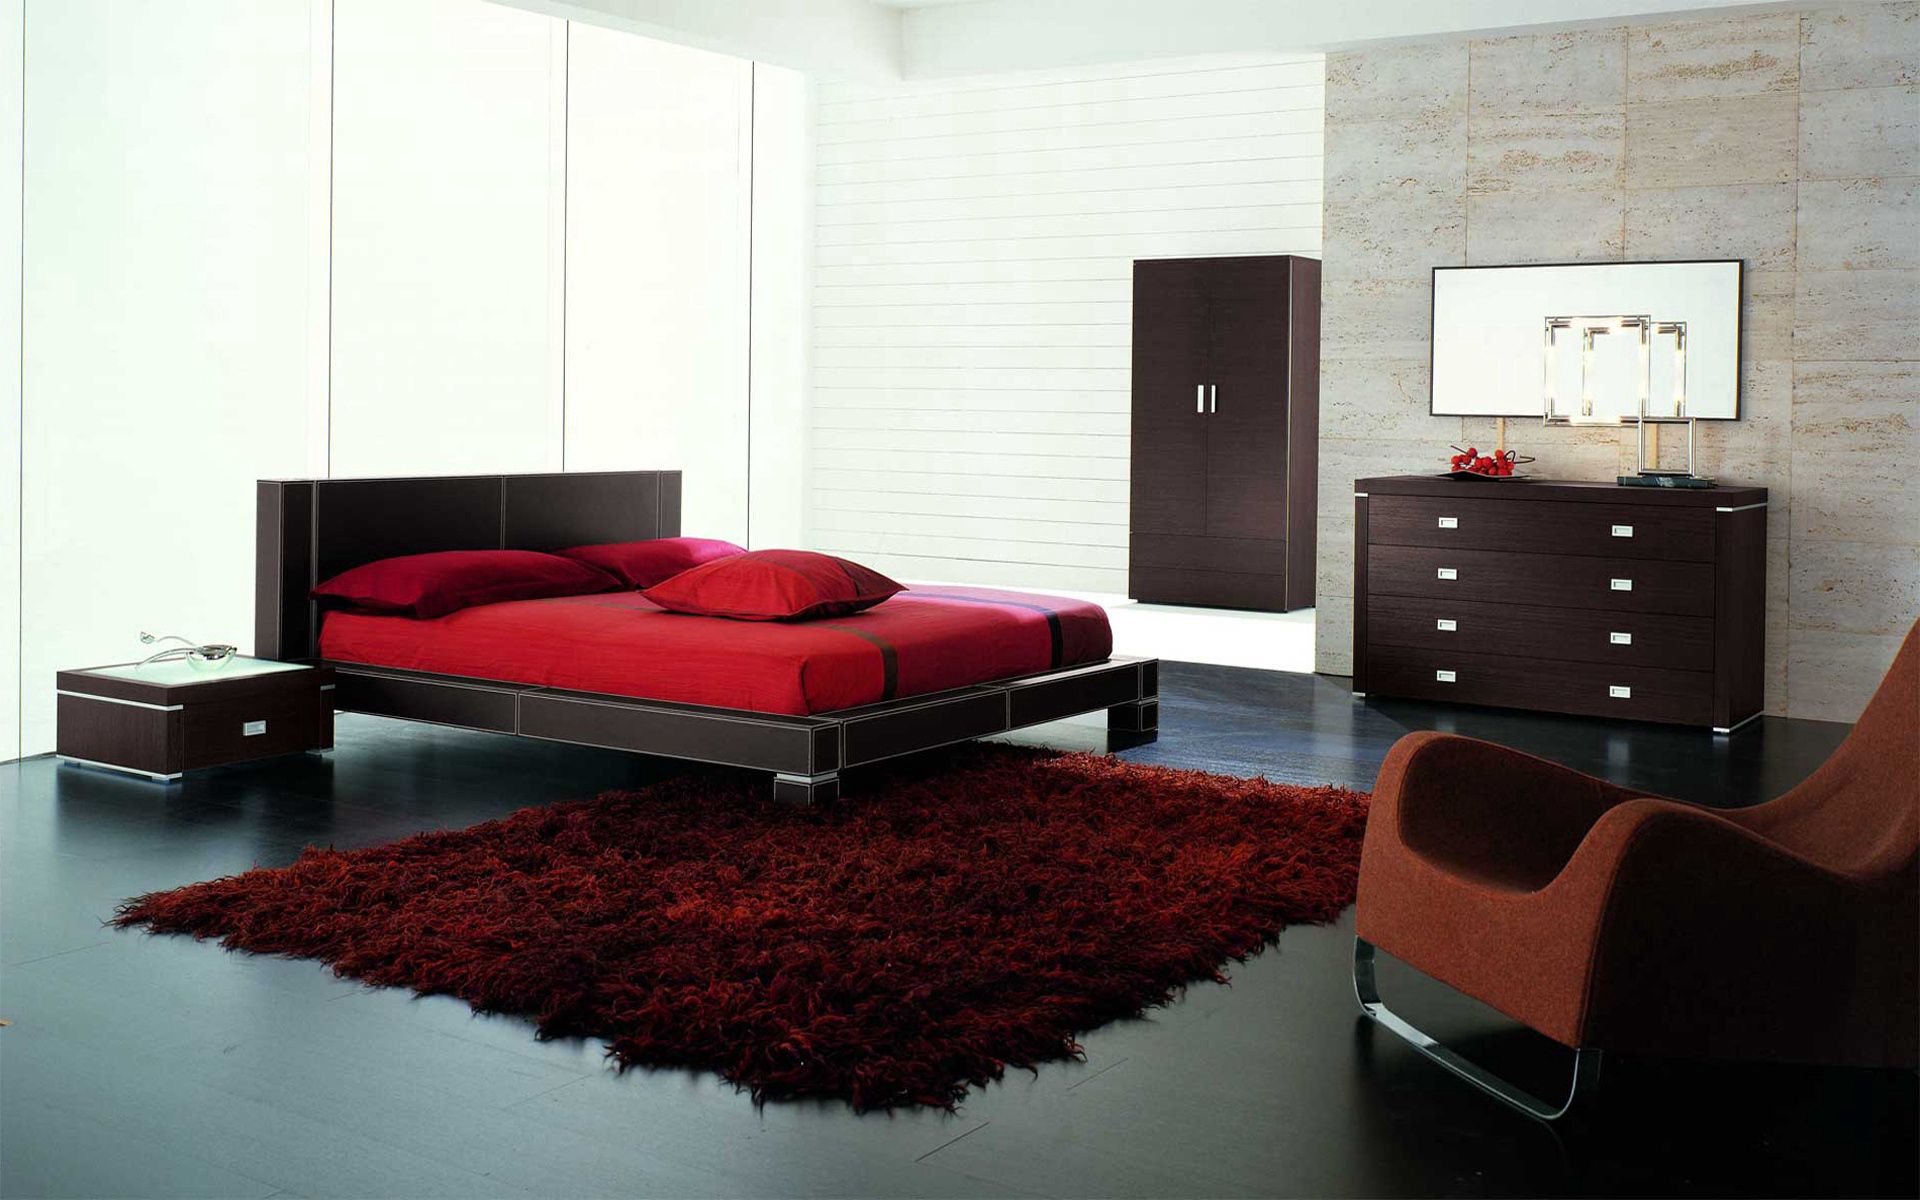 room, interior, miscellanea, miscellaneous, design, bed, modern, up to date